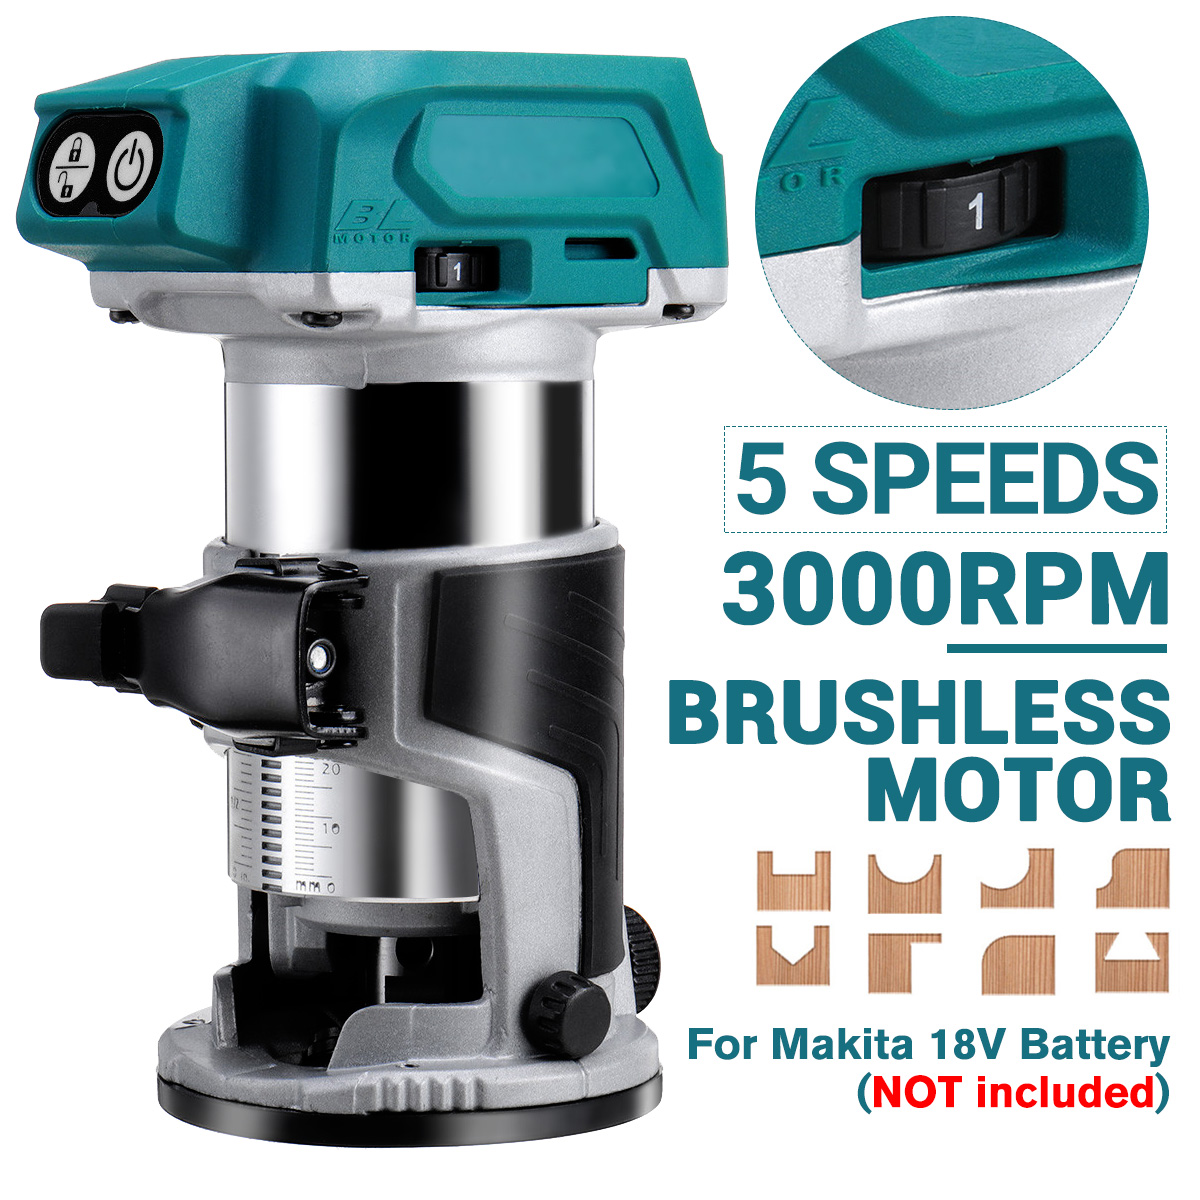 DC901-1-Brushless-Wood-Trimmer-Electric-Wood-Router-Trimmer-For-Makita-1894801-1